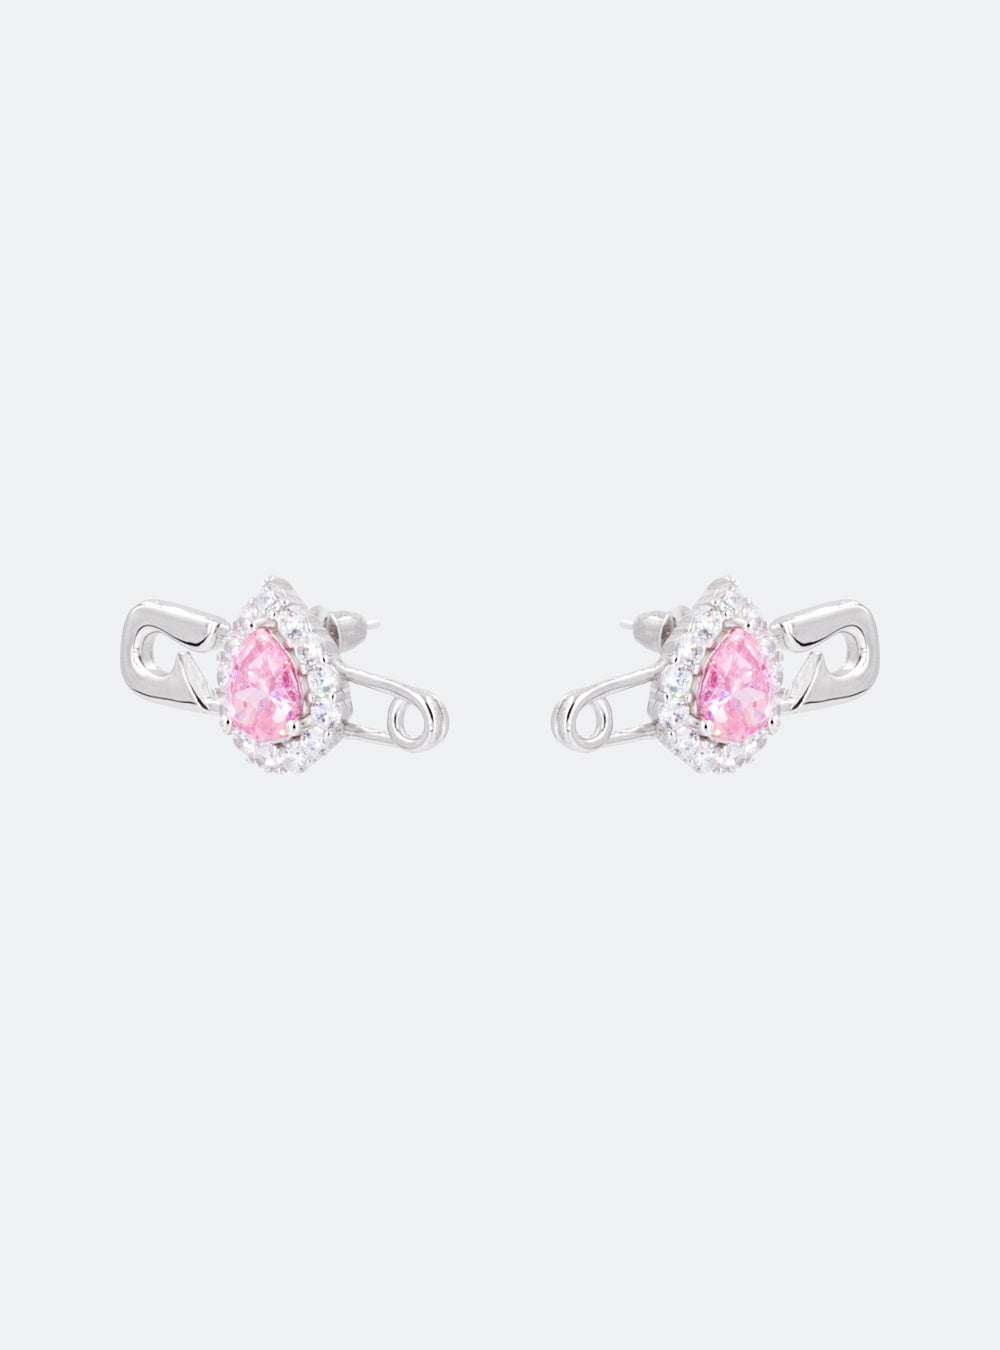 A pair of MIDNIGHTFACTORY cocktail safety-pin earrings on a white background.